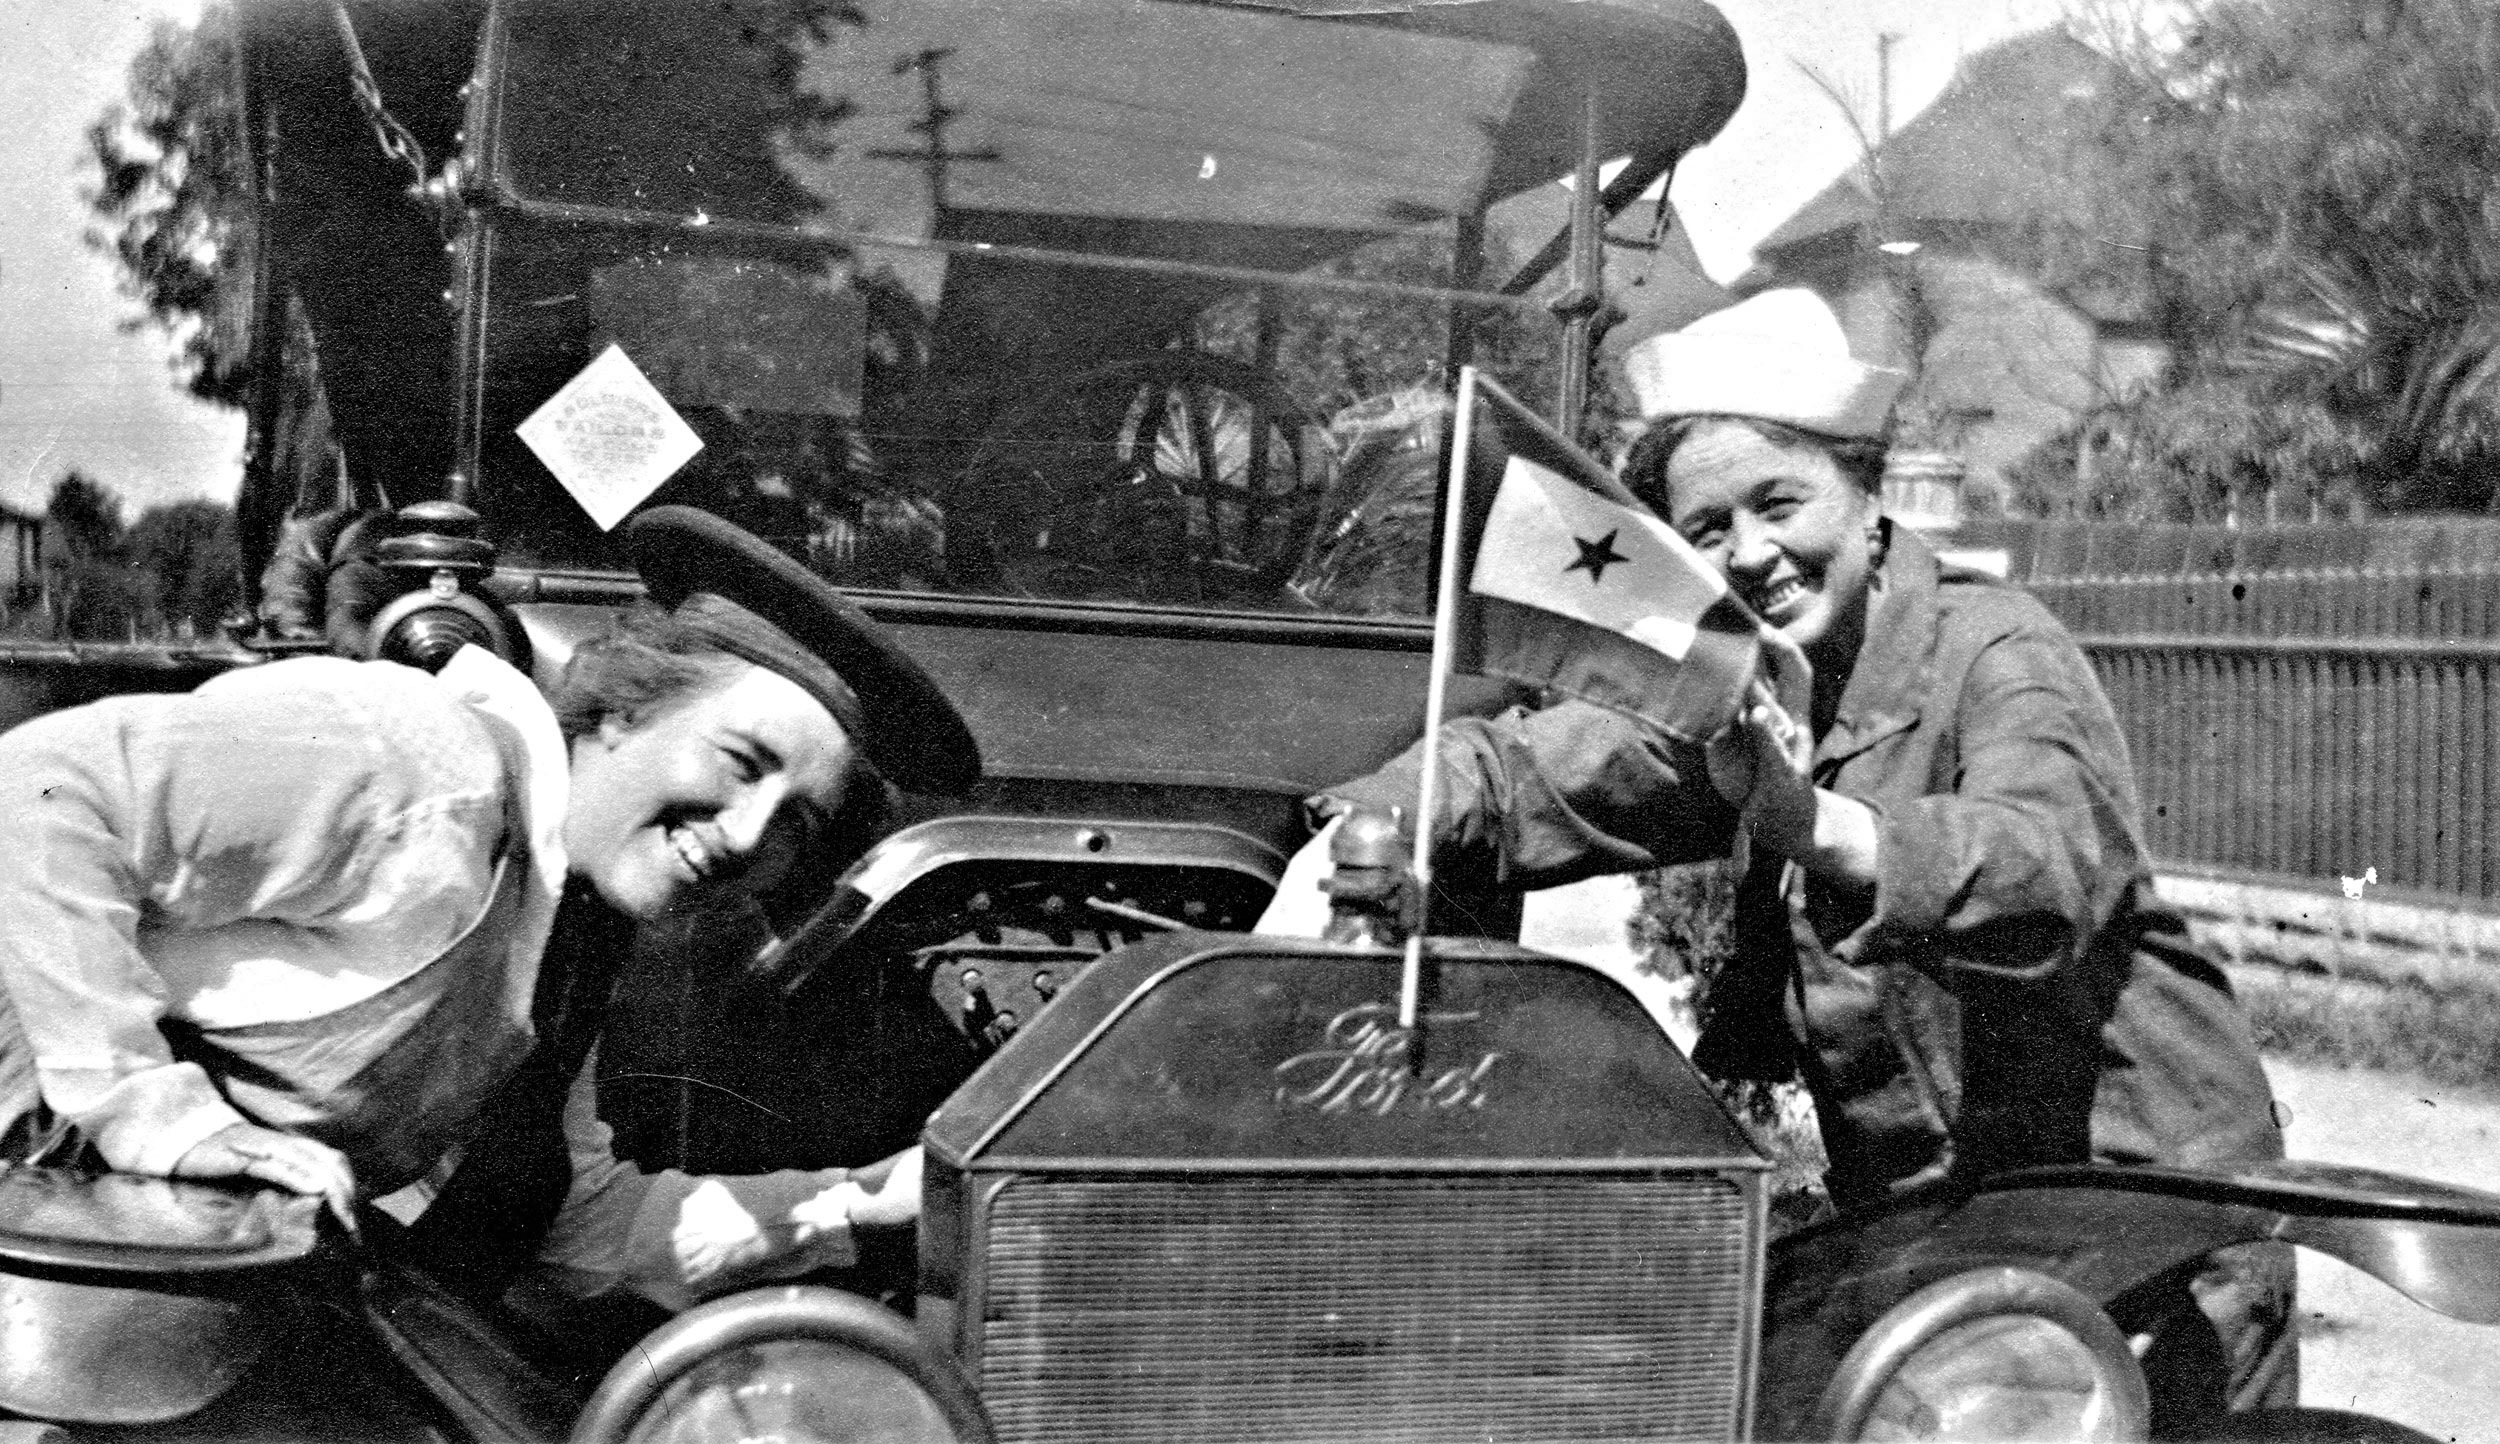 This is from a 2.7" x 4.5" paper photo found in an antique store. It's unmarked and I have no idea of its history, but that does appear to be Mrs. Roosevelt on the right? The car, style of dress and the service flag would indicate WWI era. View full size.